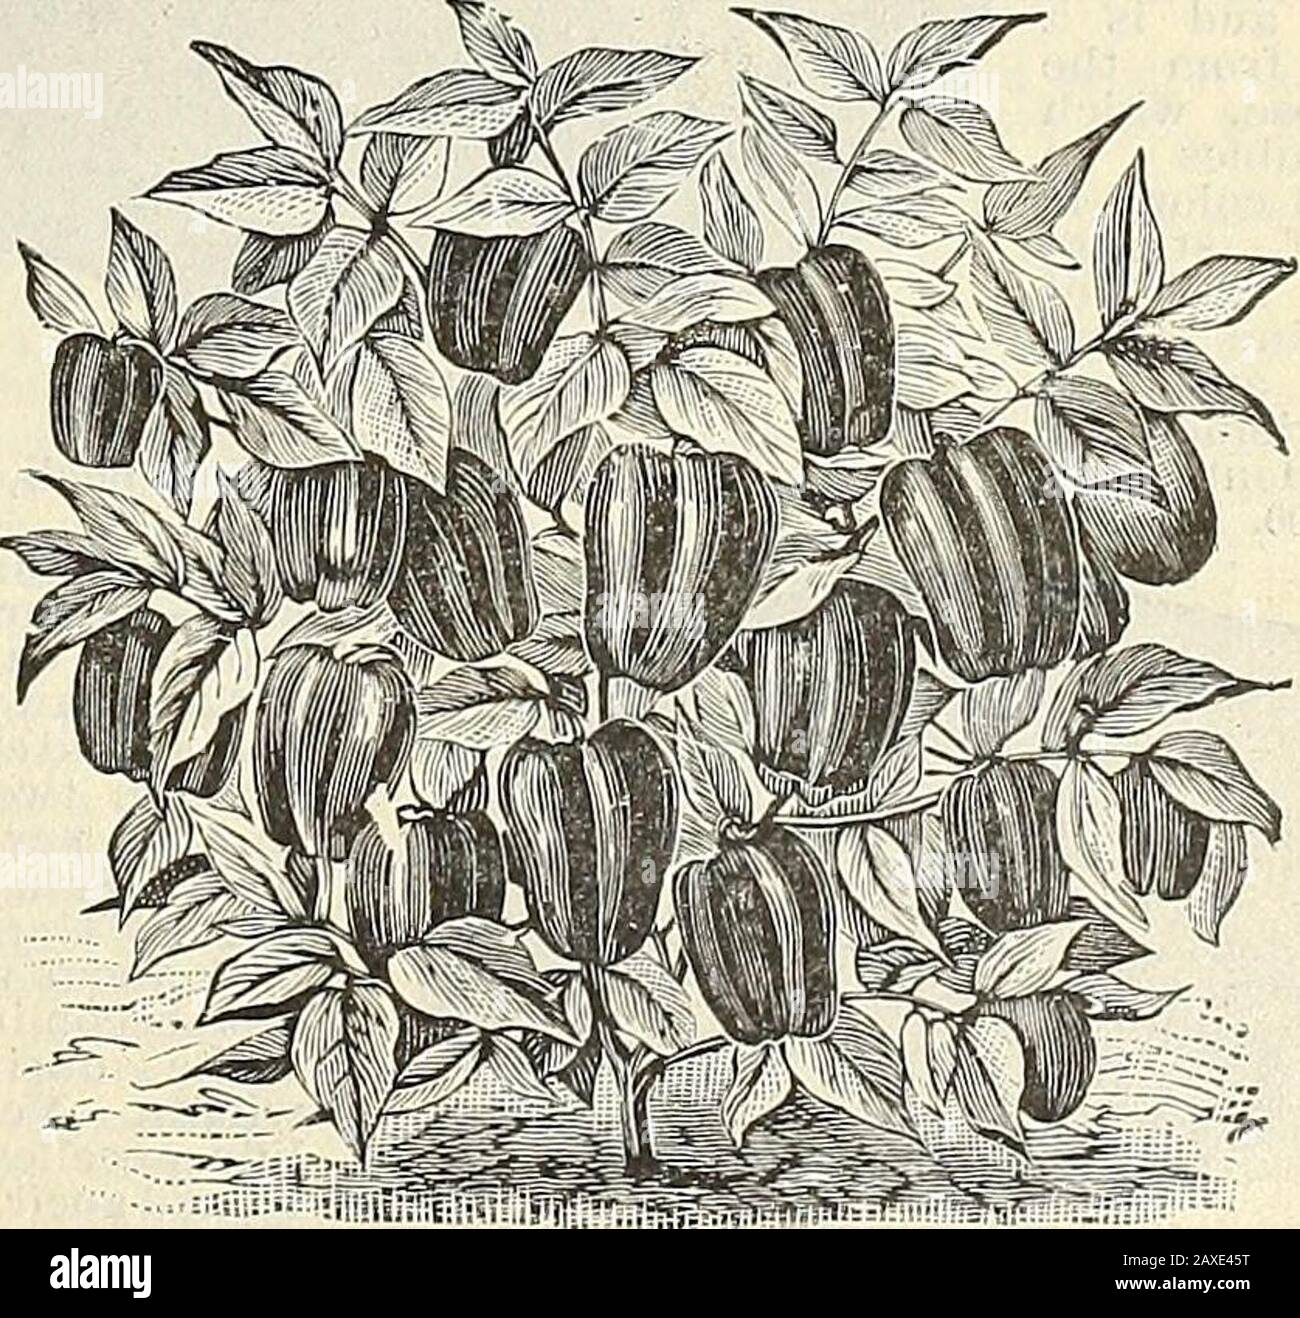 Illustrated hand book : Rawson's vegetable & flower seeds / W.WRawson & Co. . Dwarf Early Squash Pepper.. RuBV Kino 1kpper. RAWSOJSlS CATALOGUE OF VEGETABLE SEEDS. 0 PEPPERS —Continued. Sweet Spanish. —The earliest of all the varieties. The flesh is sweet, mild, and pleasant. Perpkt., 5 cts.; oz., 25cts.; 1-1 lb., 75 cts.;lb., $i.50.Coral Gem Boaquet(see cut). — Is thefinest of the small-sized varieties. Itsbeautiful littlepods of shiningred color are sothickly set as togive it the appear-ance of a bouquetof corals, henceits name. Besidesits great beauty,it serves the house-keeper in a mostcon Stock Photo